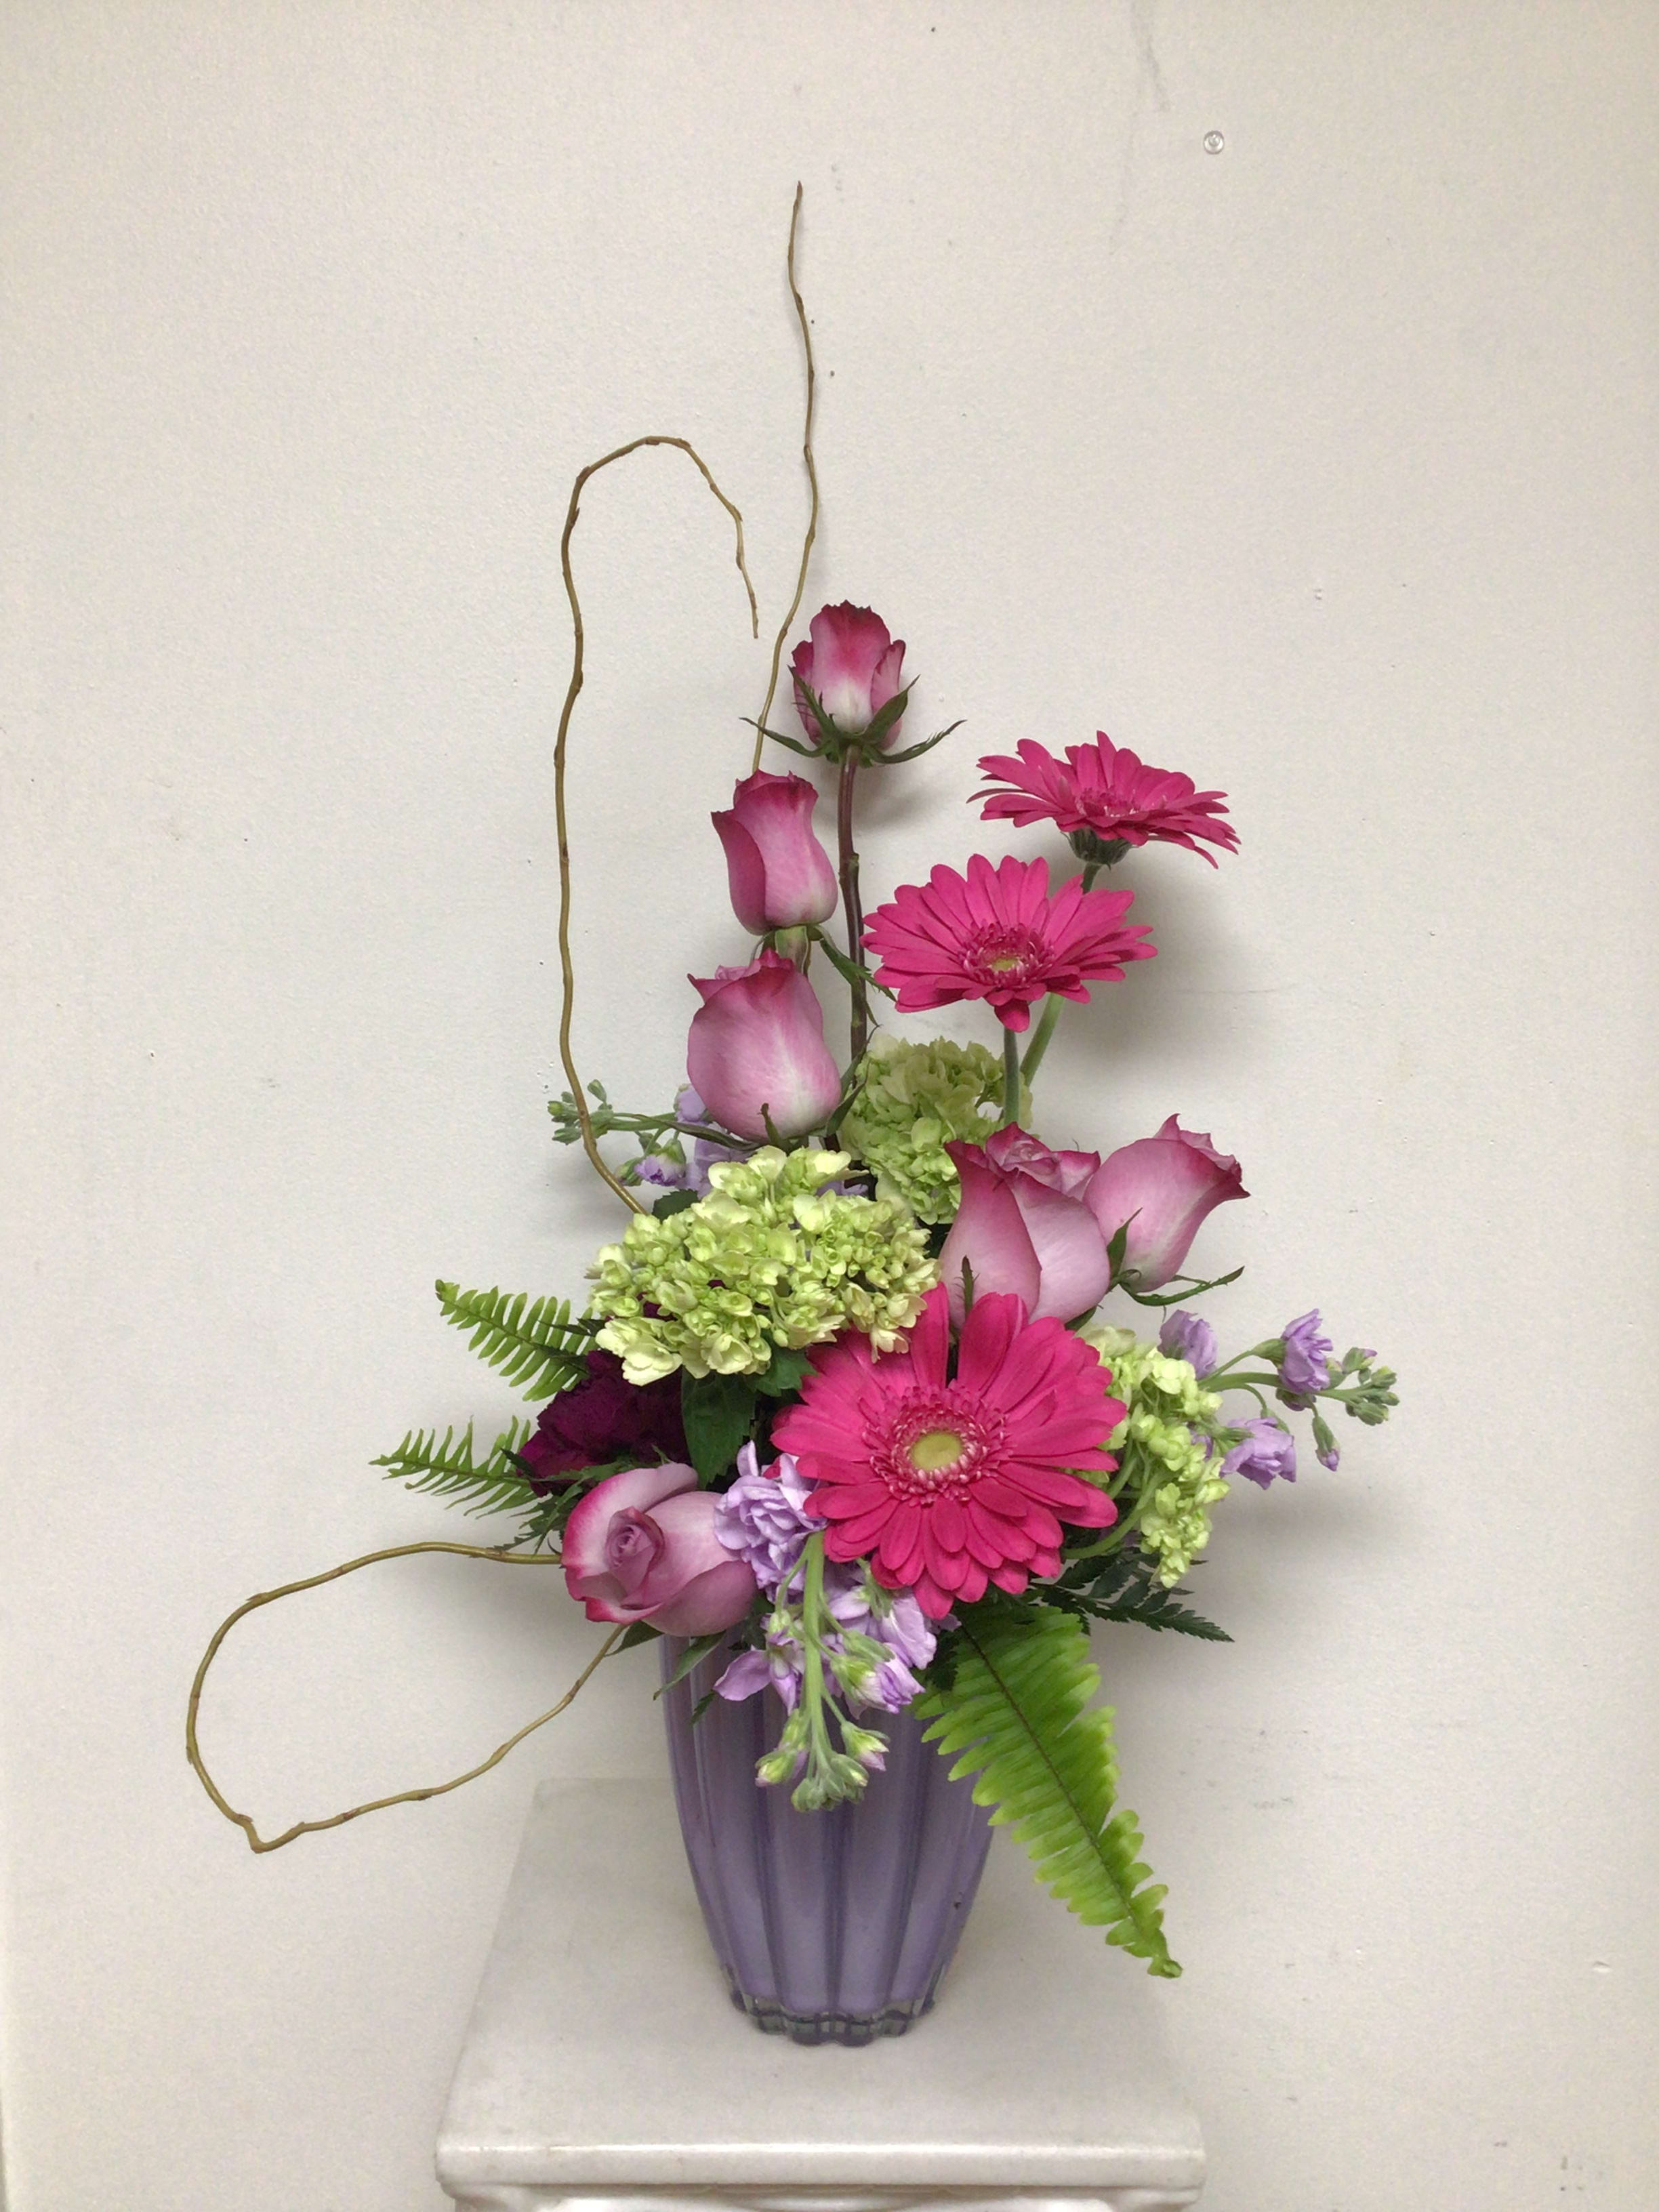 Trio - This contemporary arrangement is arranged in a lavender clam shell vase and  is filled with dark purple carnations, lavender roses, green hydrangea, lavender stock, pink gerberas, sword fern, mixed greenery and accented with curly willow, all done in groupings of three. Approximate size is 22 inches tall and 15 inches wide.